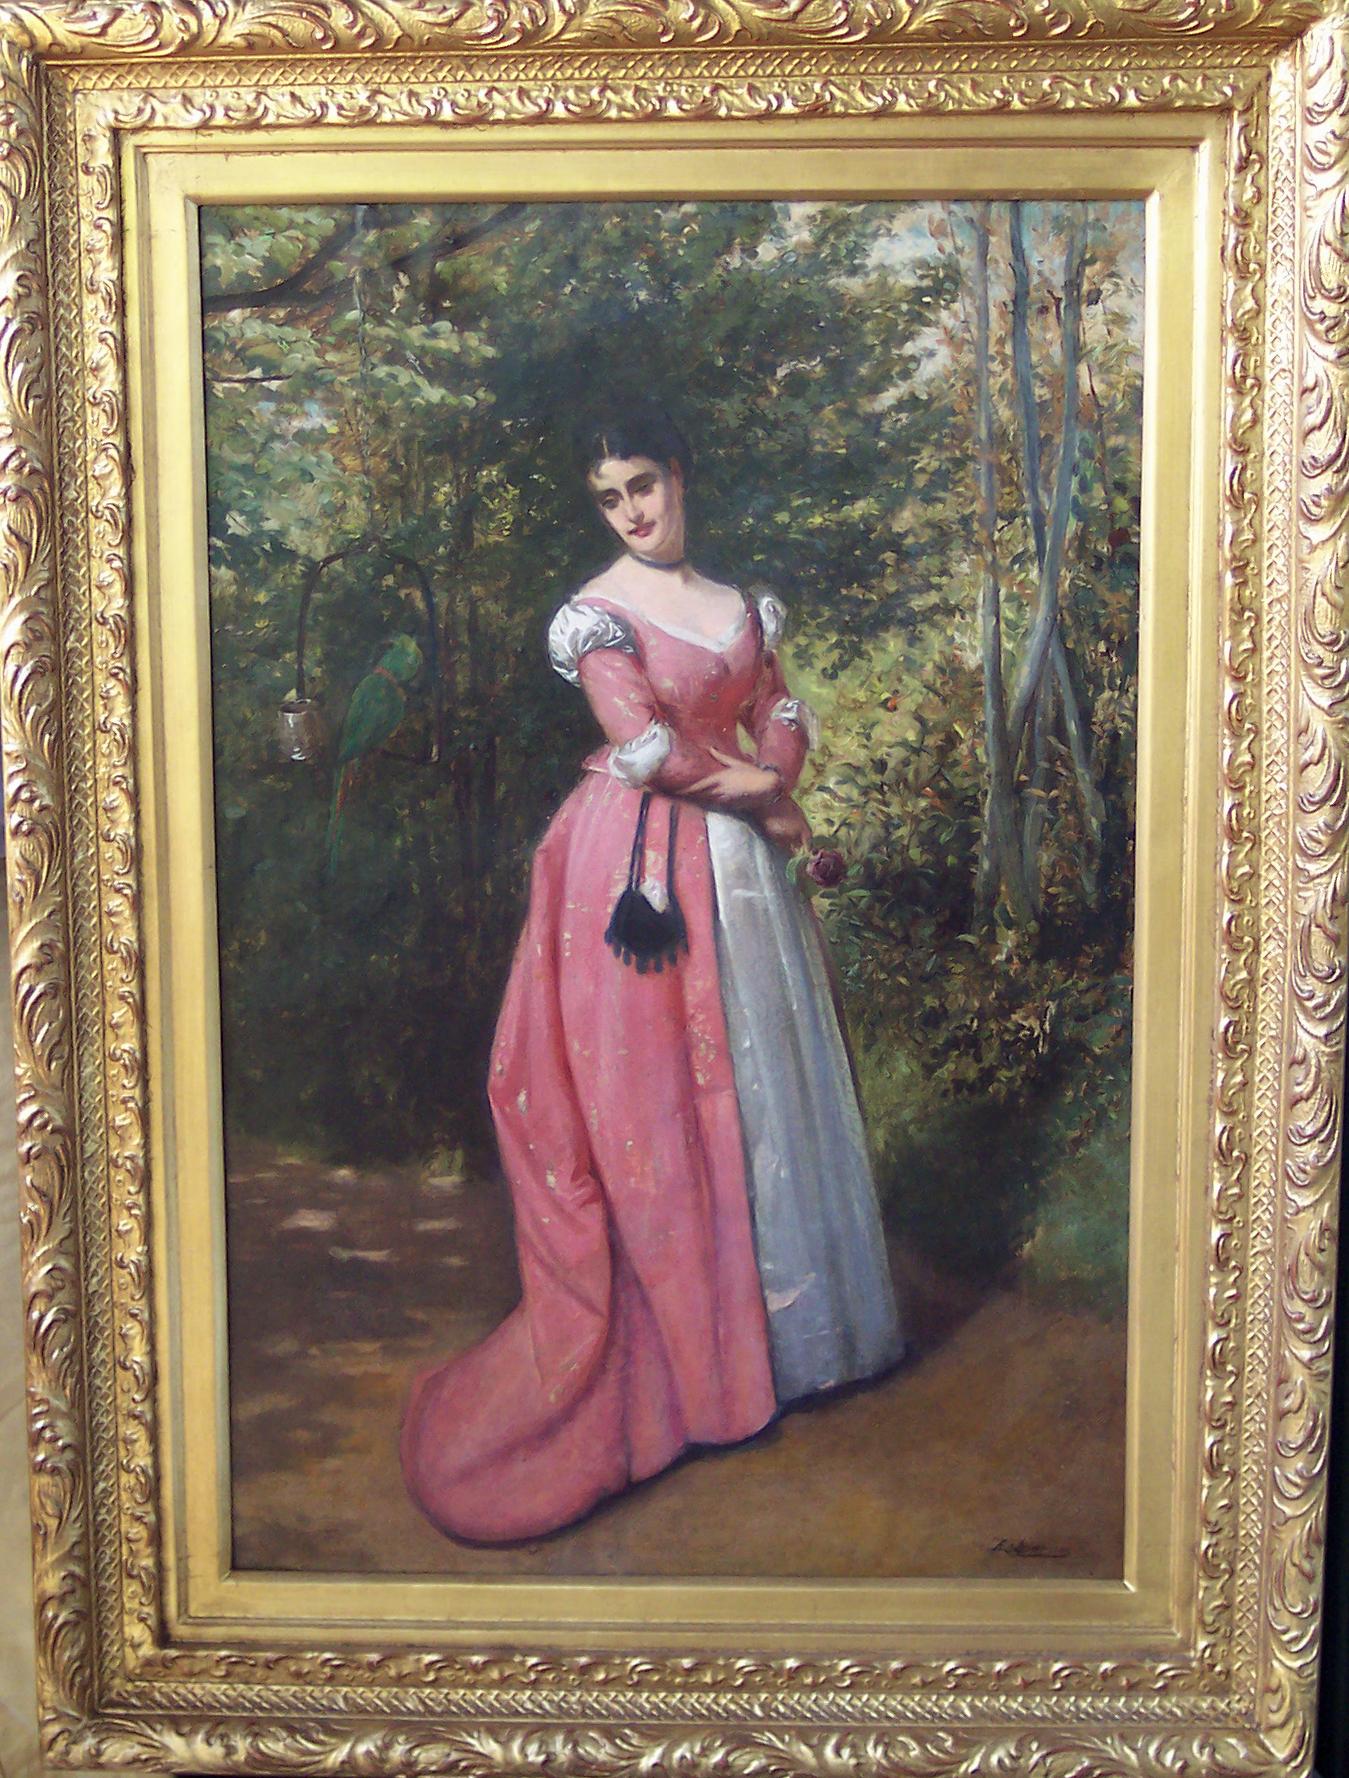 Victorian Woman Standing in Garden Admiring a Parrot 19th c English oil painting